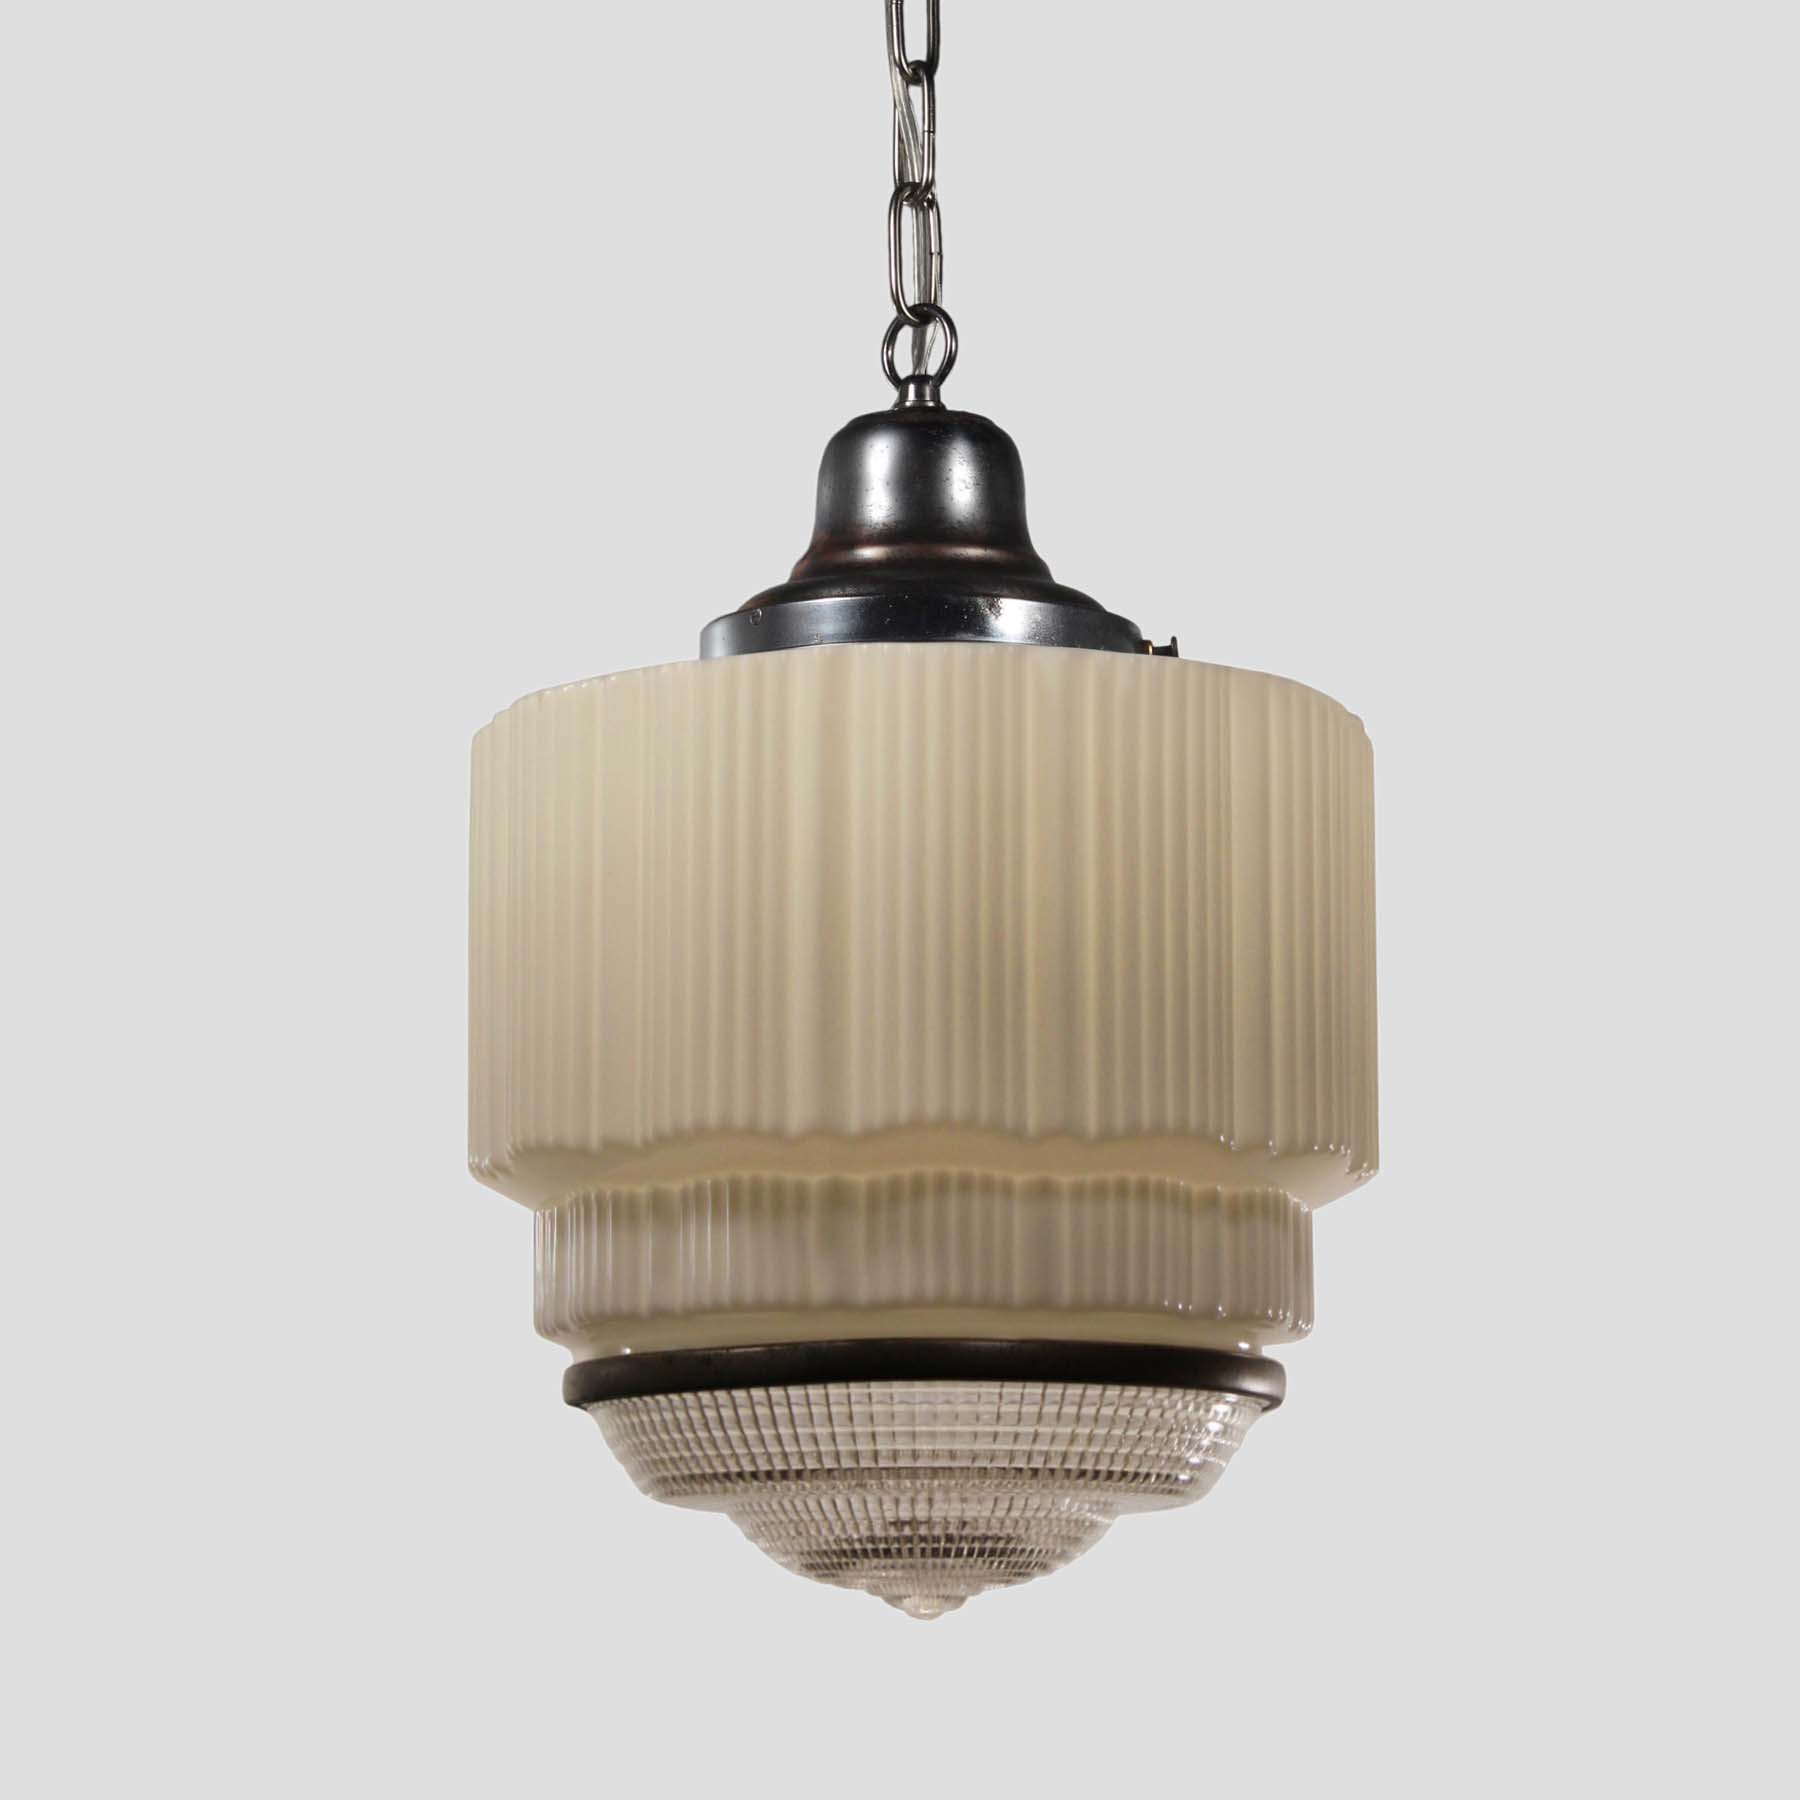 SOLD Large Antique Art Deco Skyscraper Pendant Light with Two-Part Prismatic Shade-69961